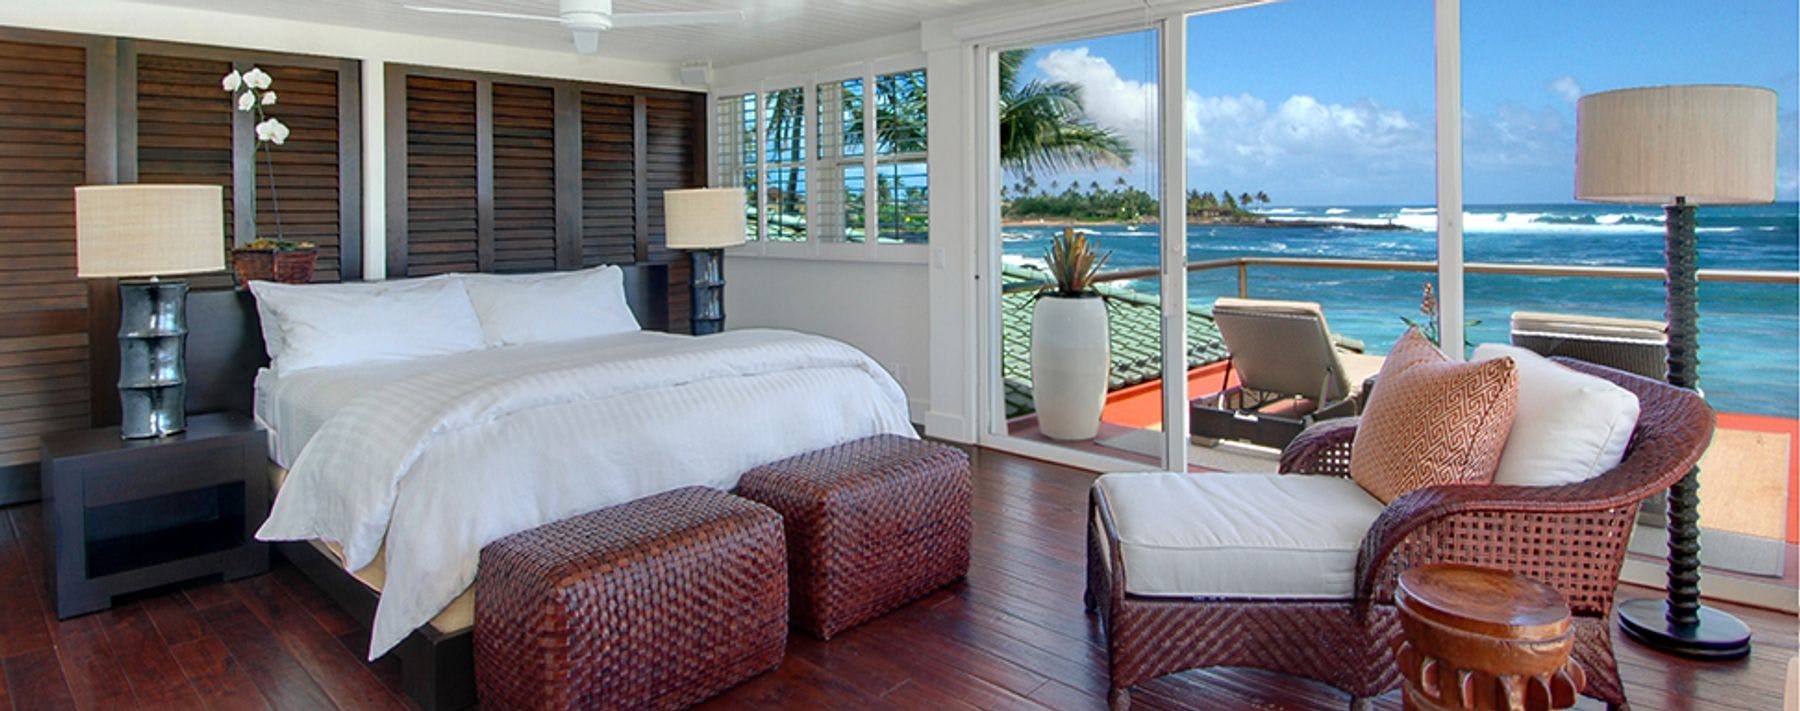 Primary bedroom with ocean views from Kauai vacation rental home